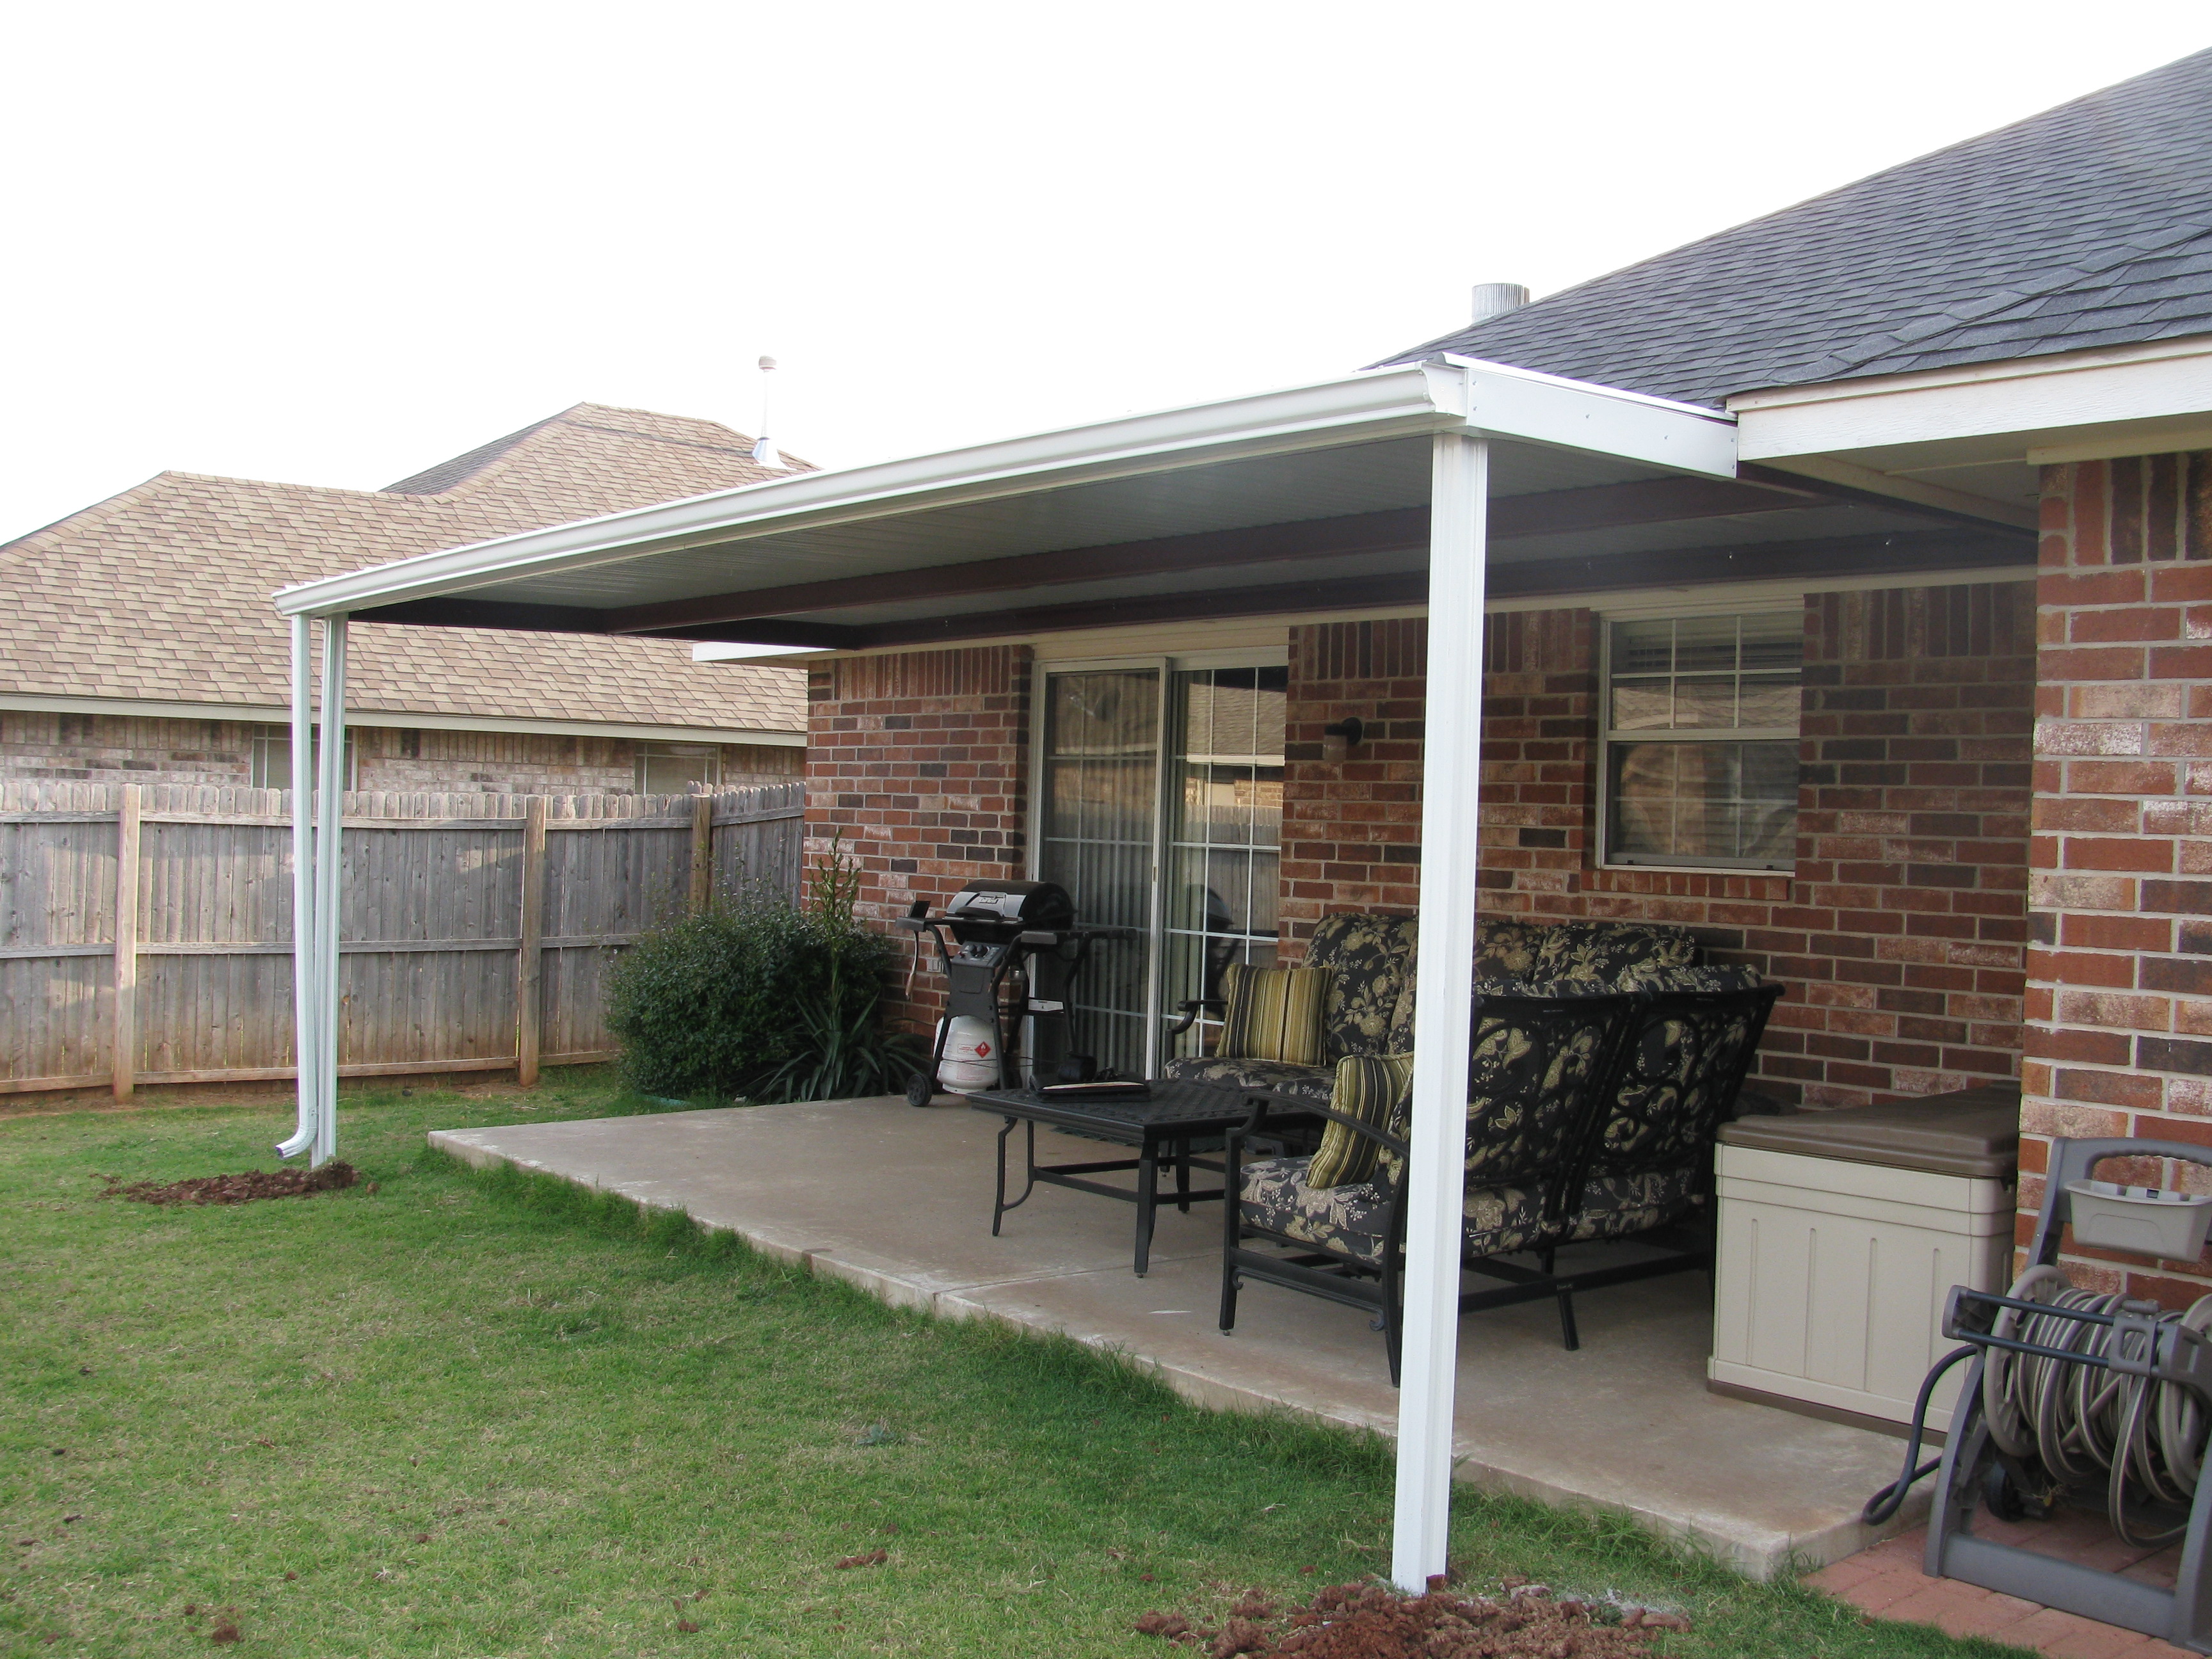 Patio Cover Photo Gallery